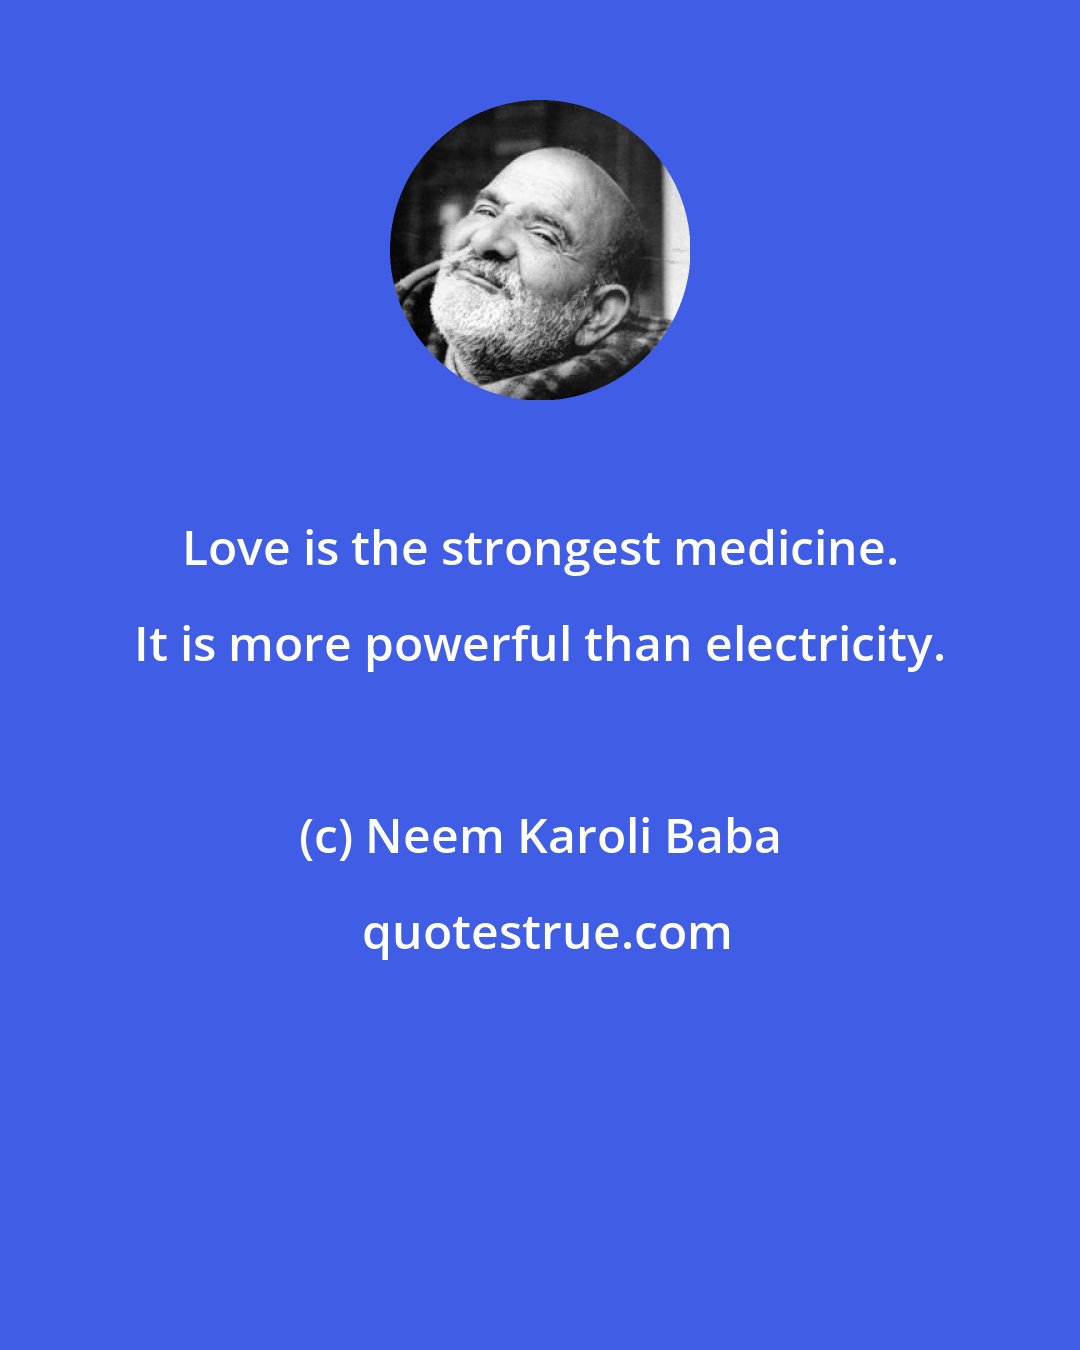 Neem Karoli Baba: Love is the strongest medicine. It is more powerful than electricity.